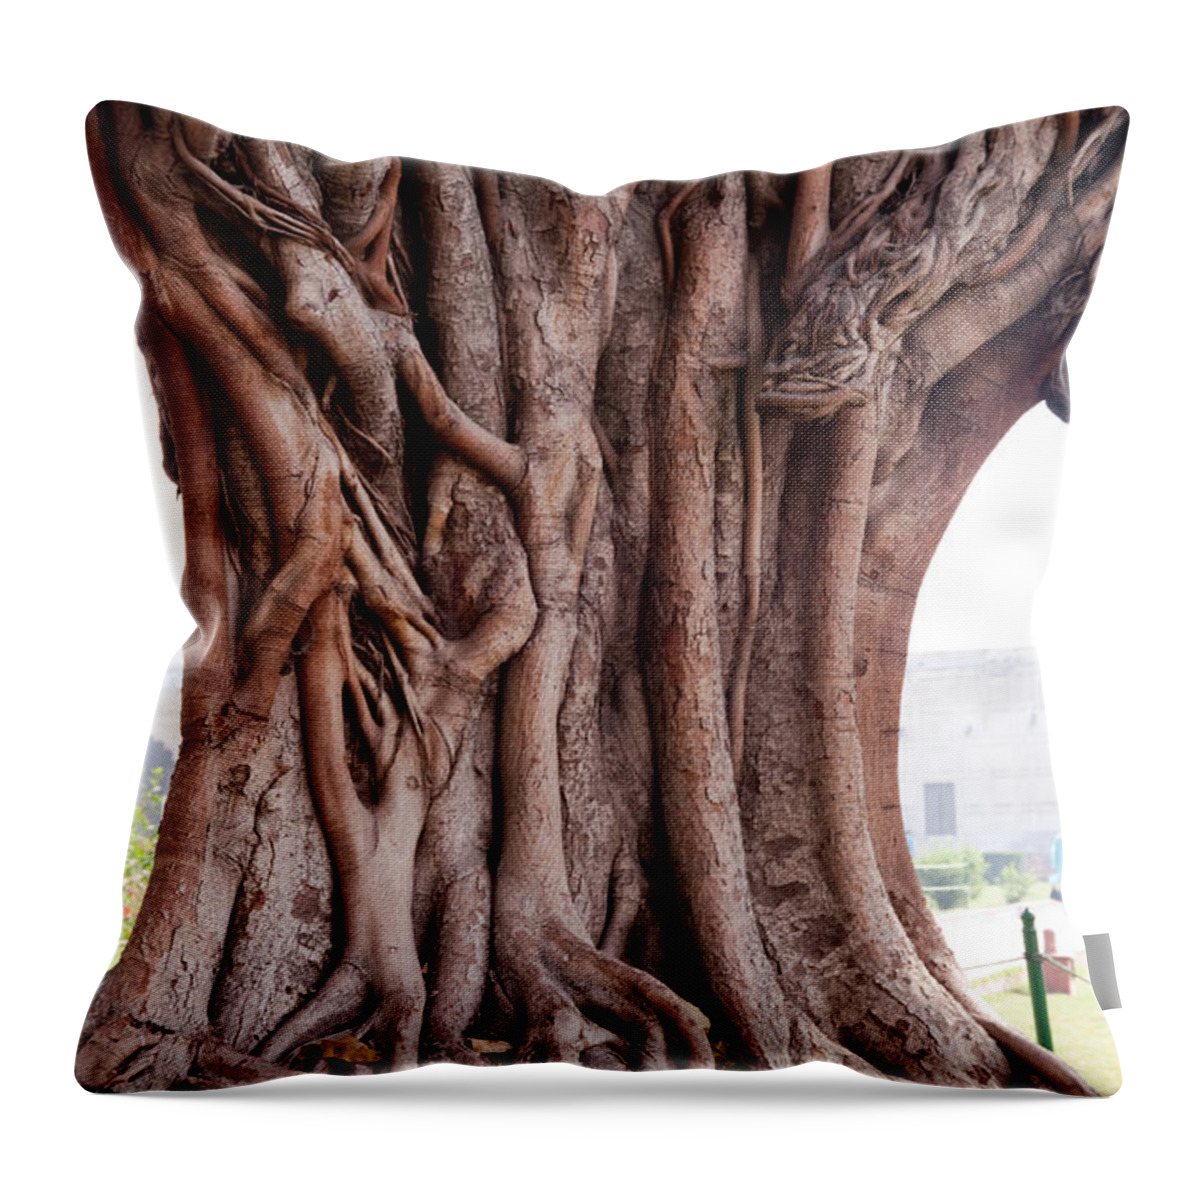 Tree Throw Pillow featuring the photograph The twisted and gnarled stump and stem of a large tree inside the Qutub Minar Compound by Ashish Agarwal